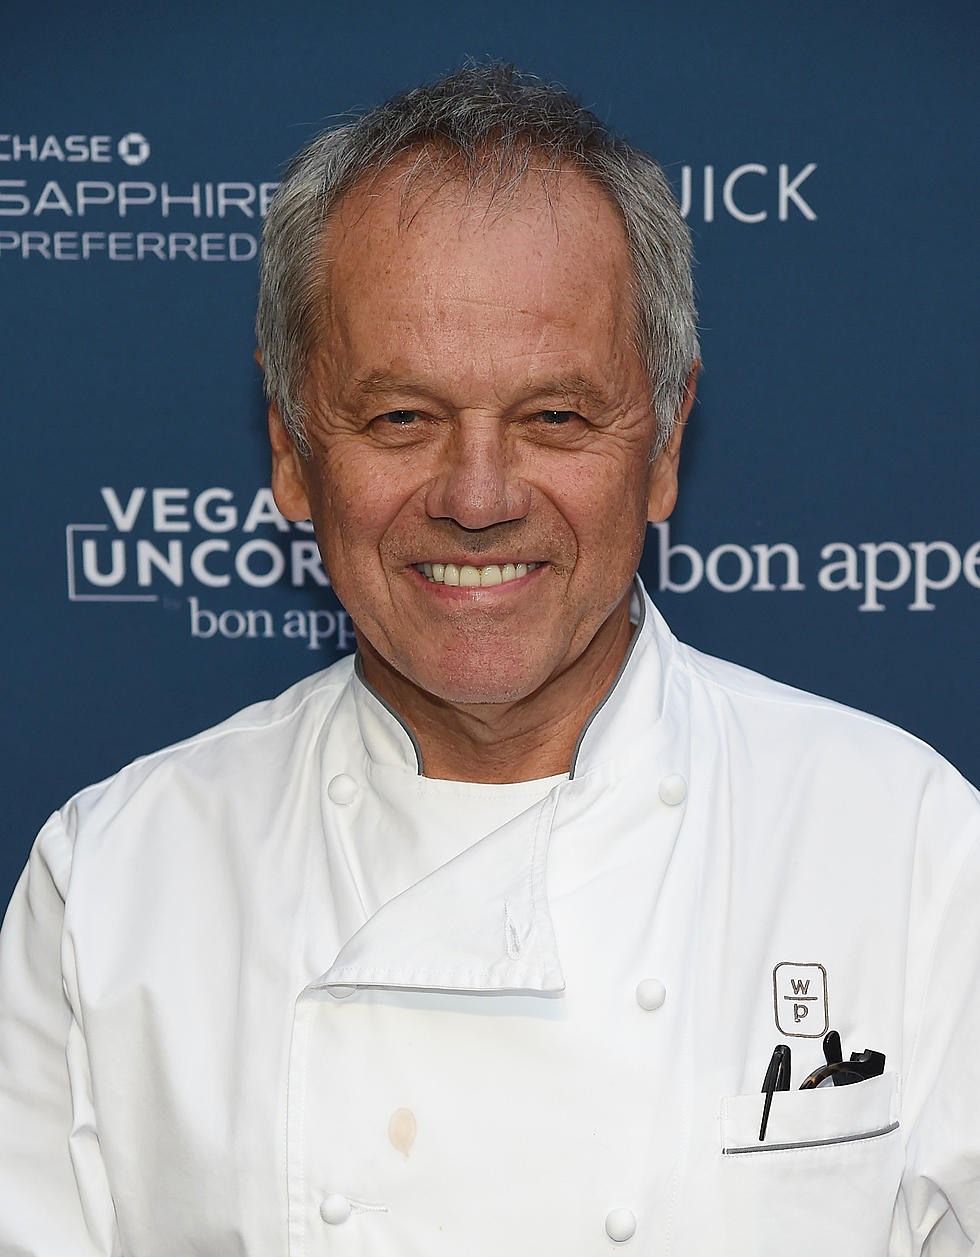 Wolfgang Puck To Be At Opening of His Latest Restaurant Concept at Amway Grand Plaza